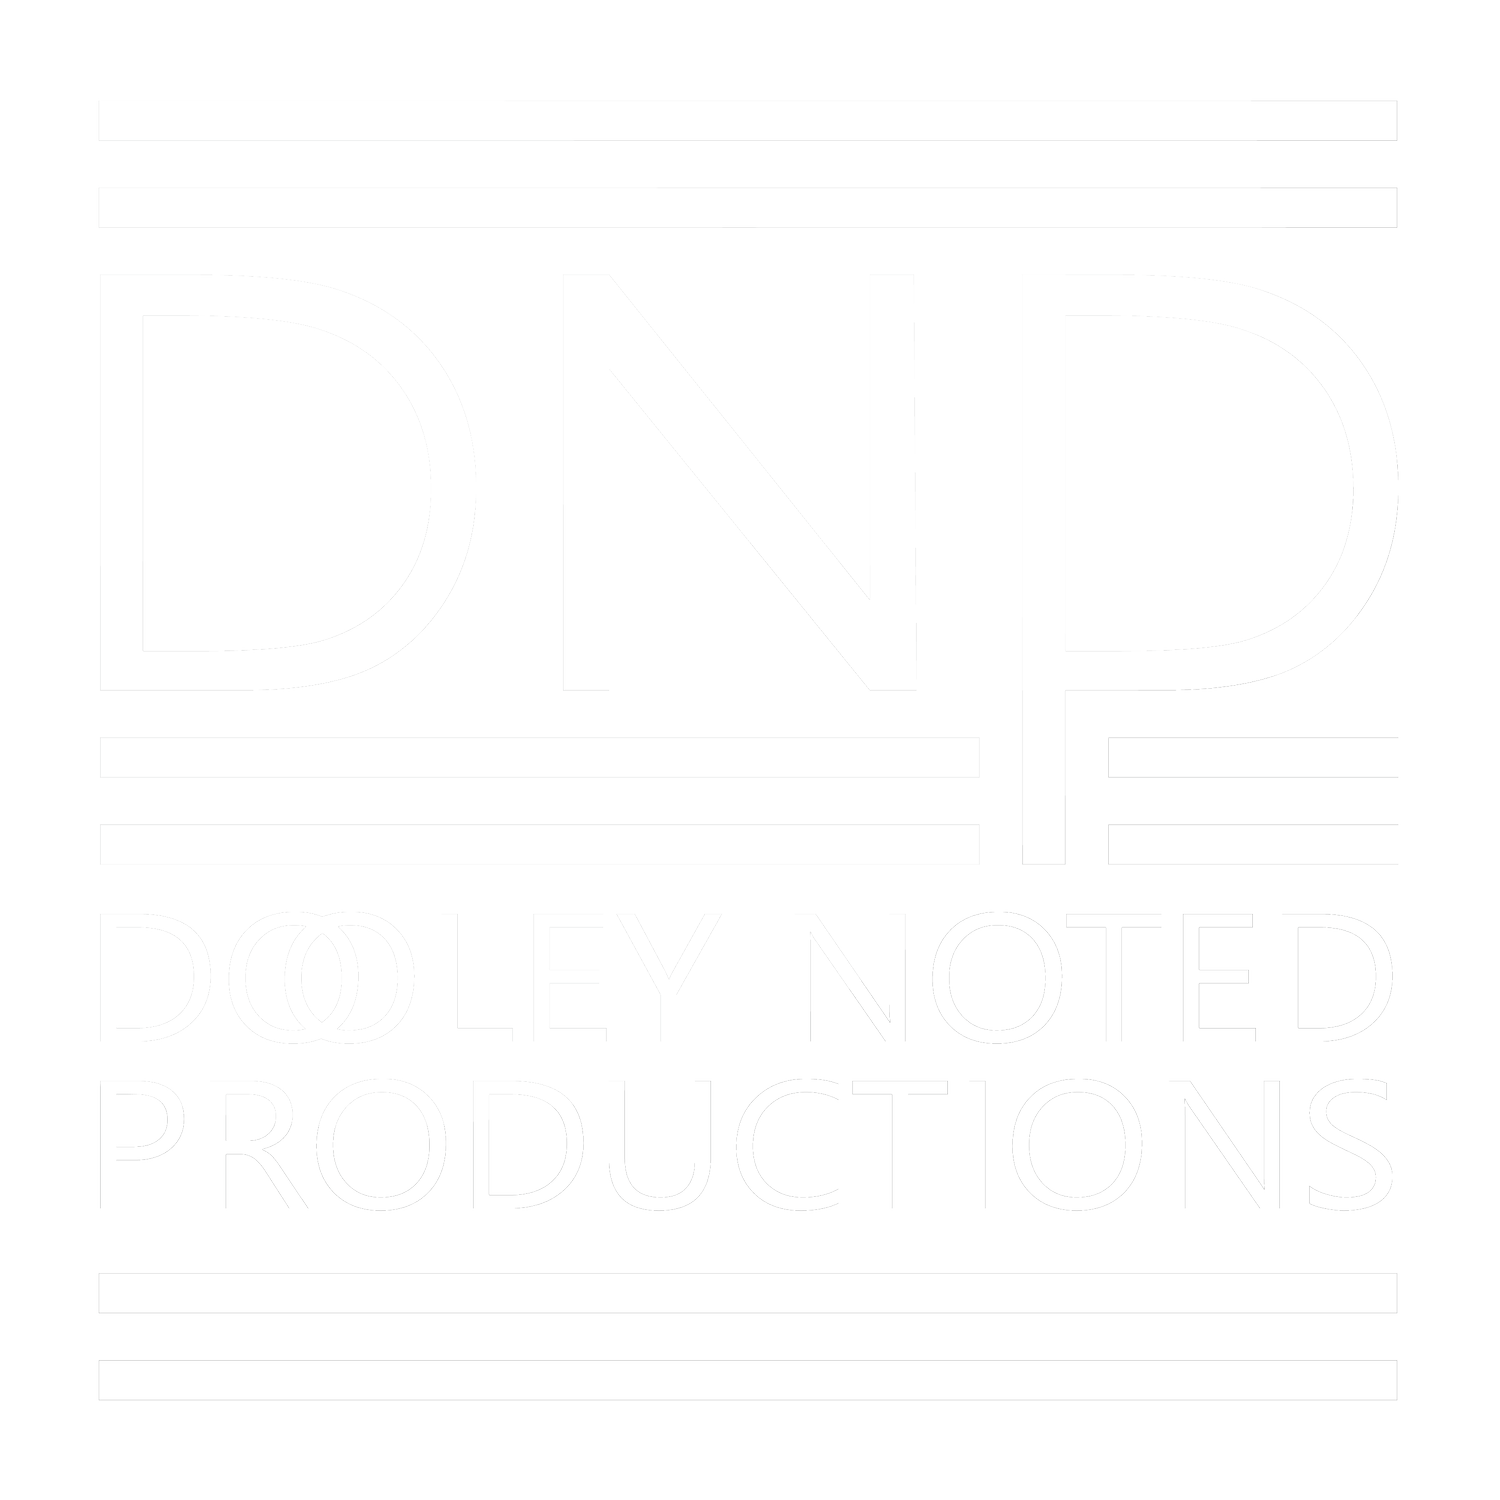 Dooley Noted Productions